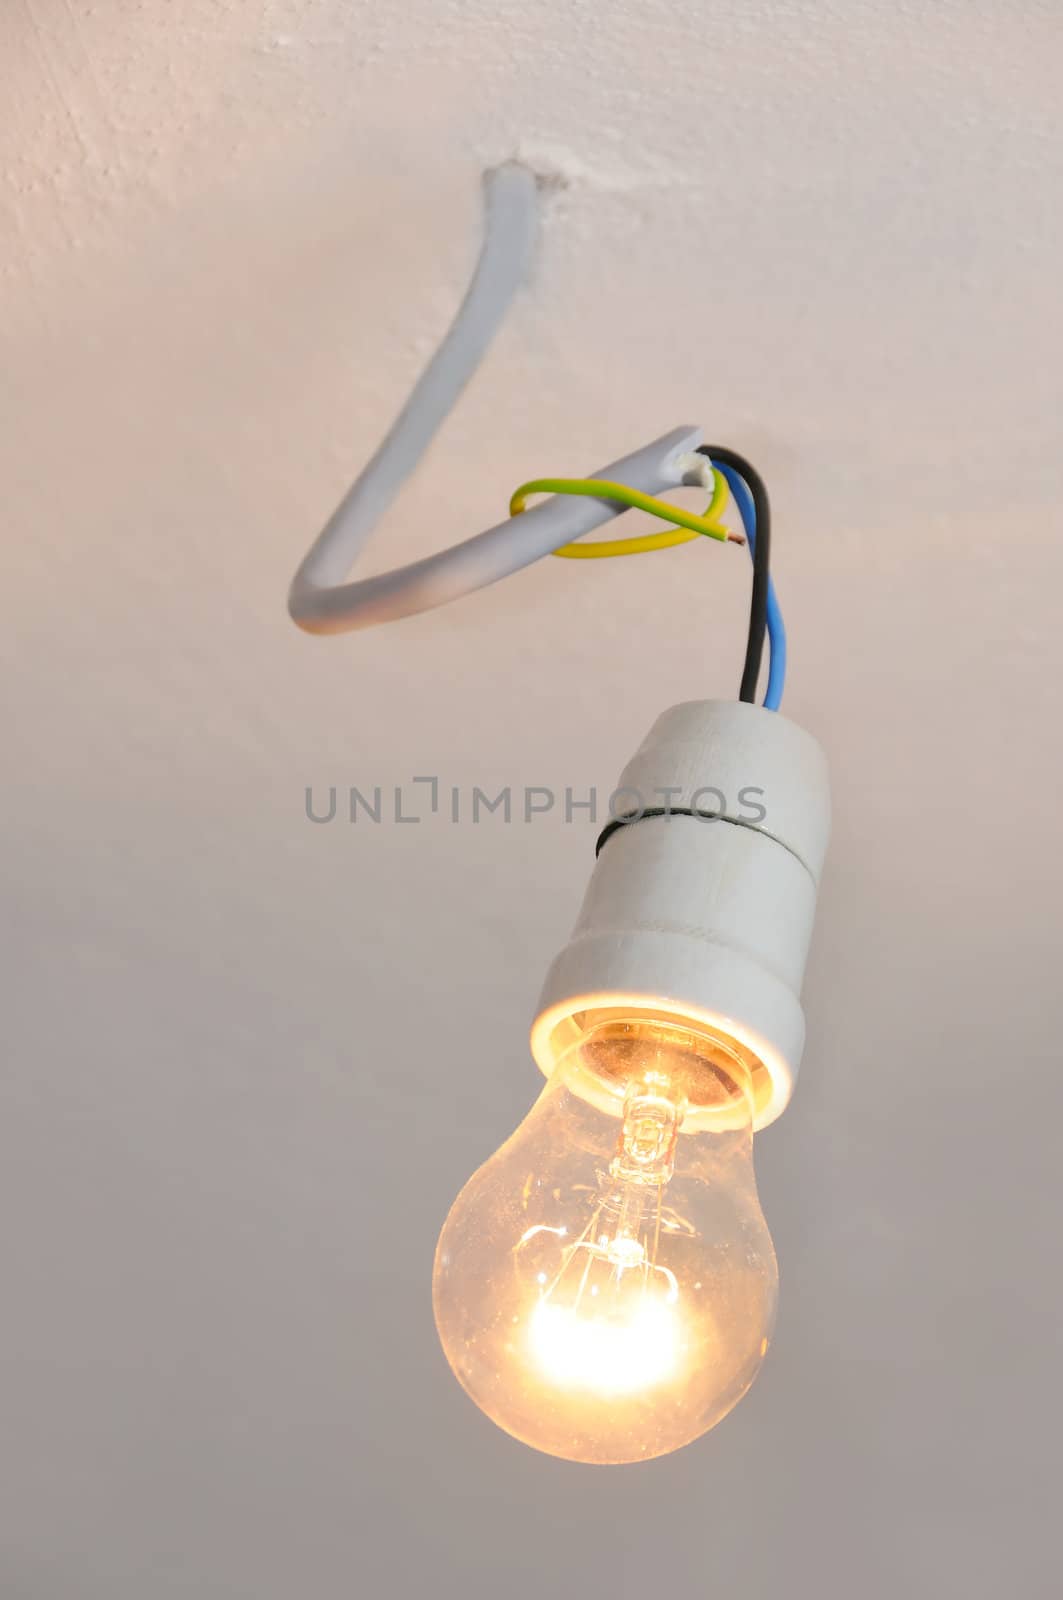 A glowing light bulb hanging on a cable, retro